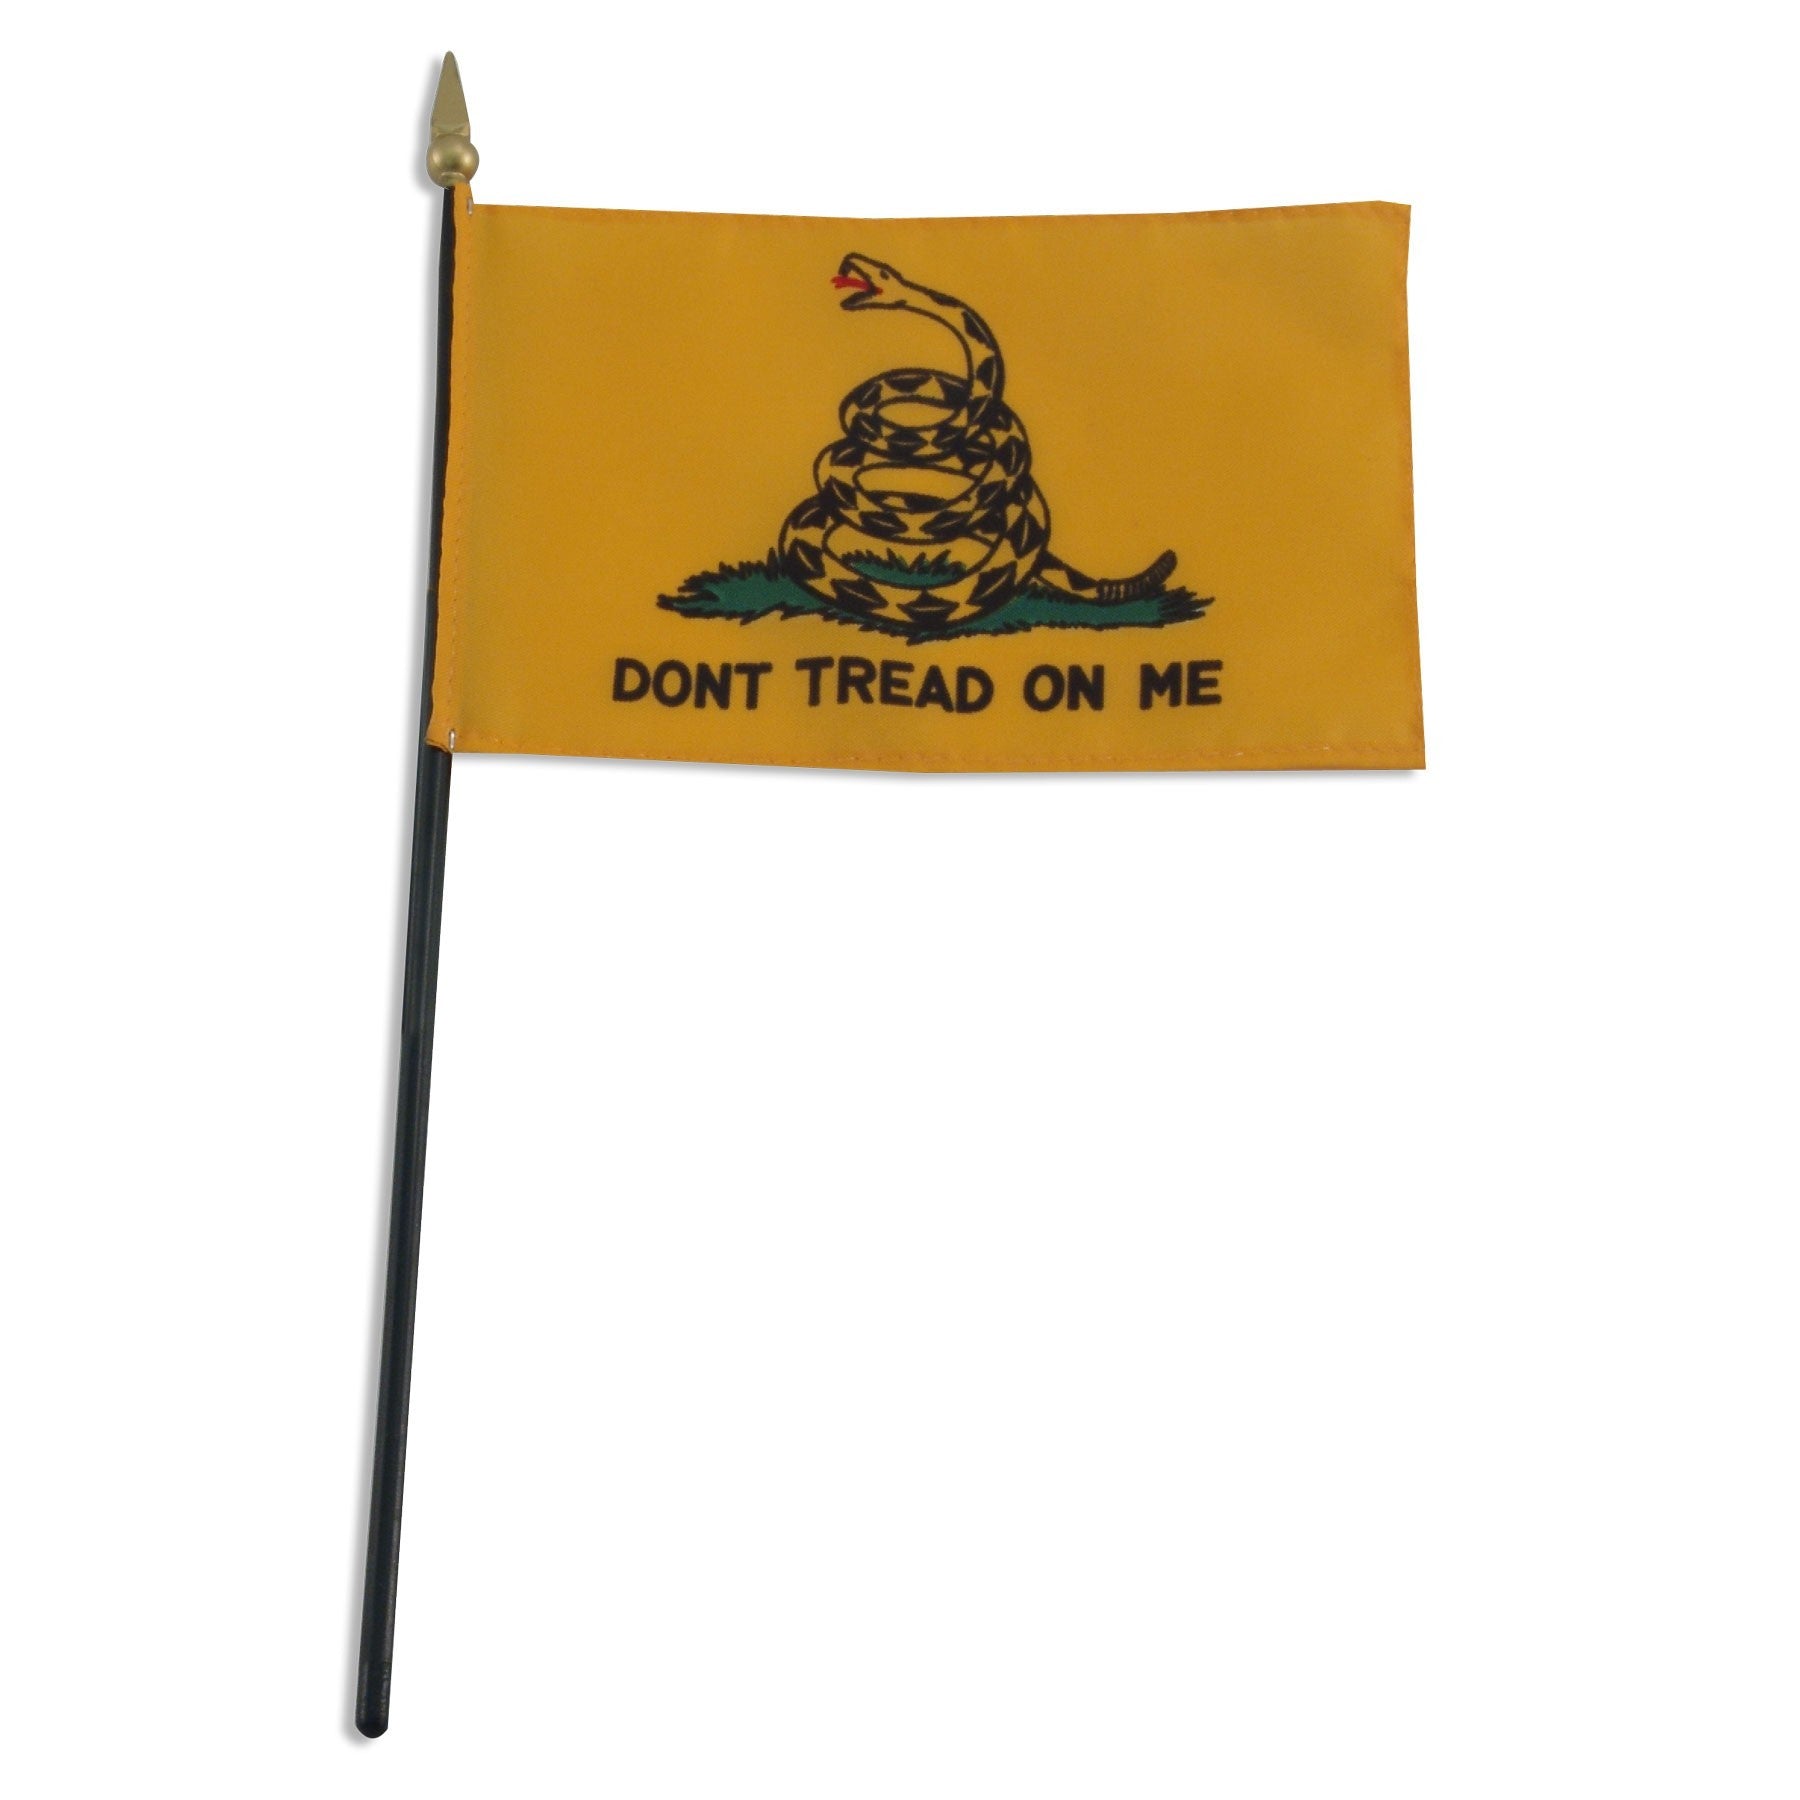 Histoical Gadsden "Don't Tread on Me" 4" x 6" Miniature Handheld Flags